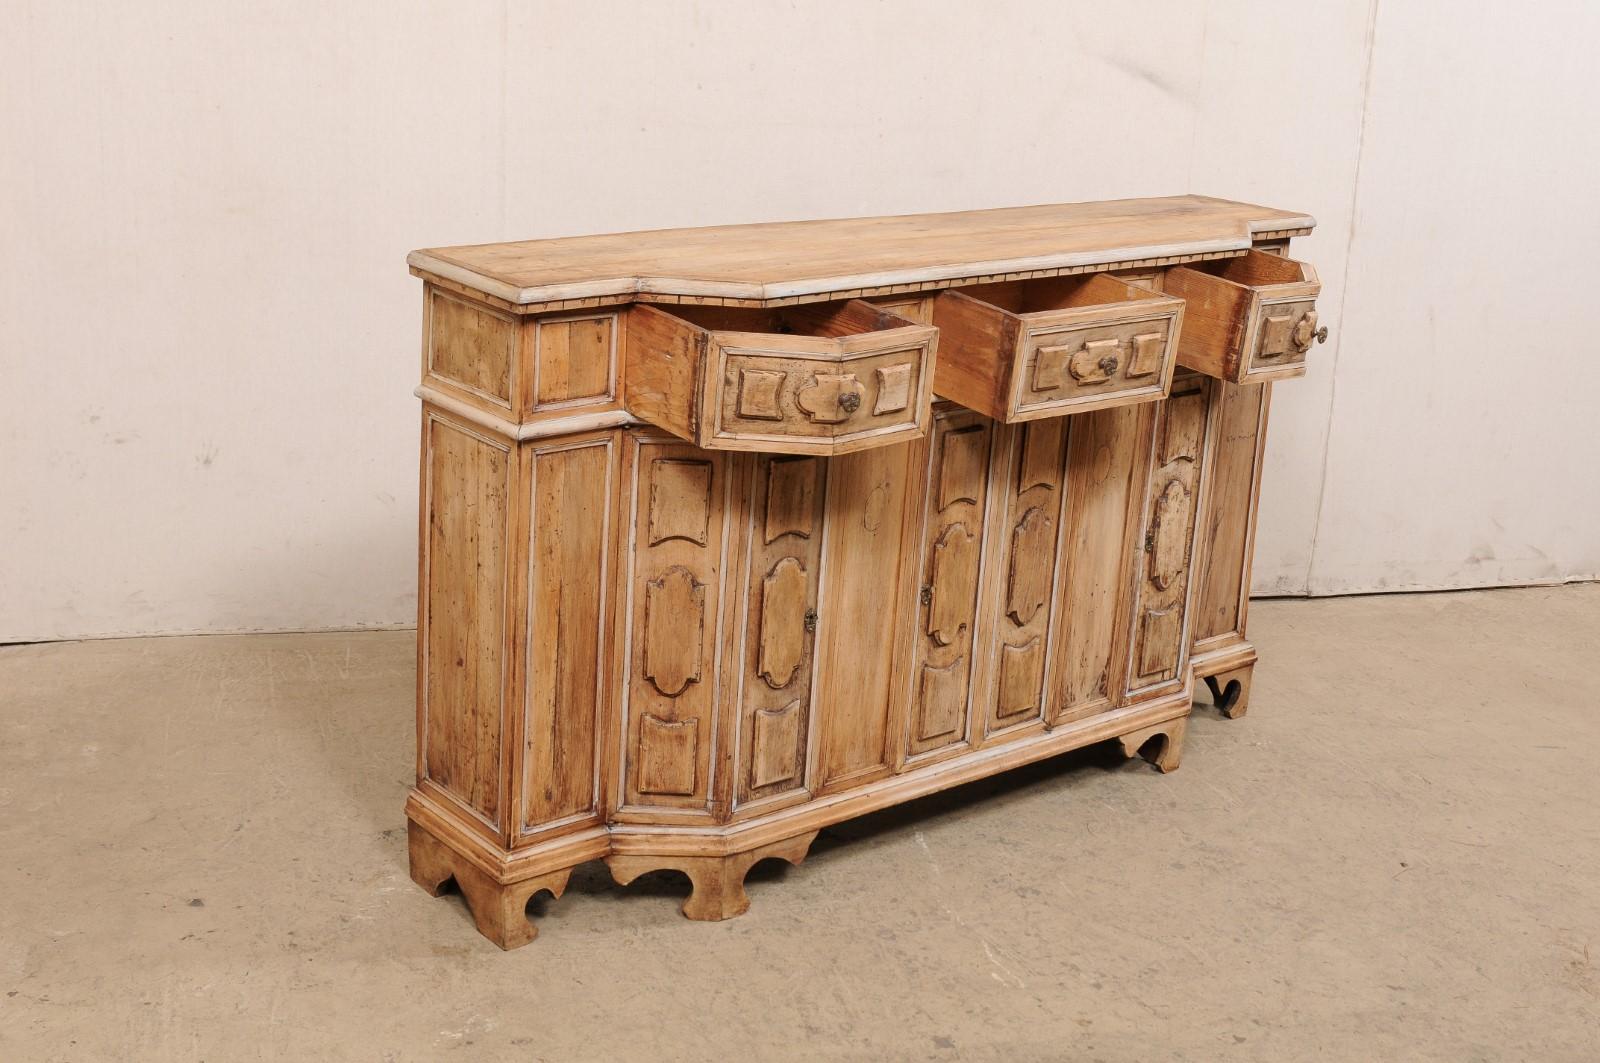 19th Century Italian 19th C. Nicely-Carved Wood Break-Front Credenza 'with Slender Depth!'